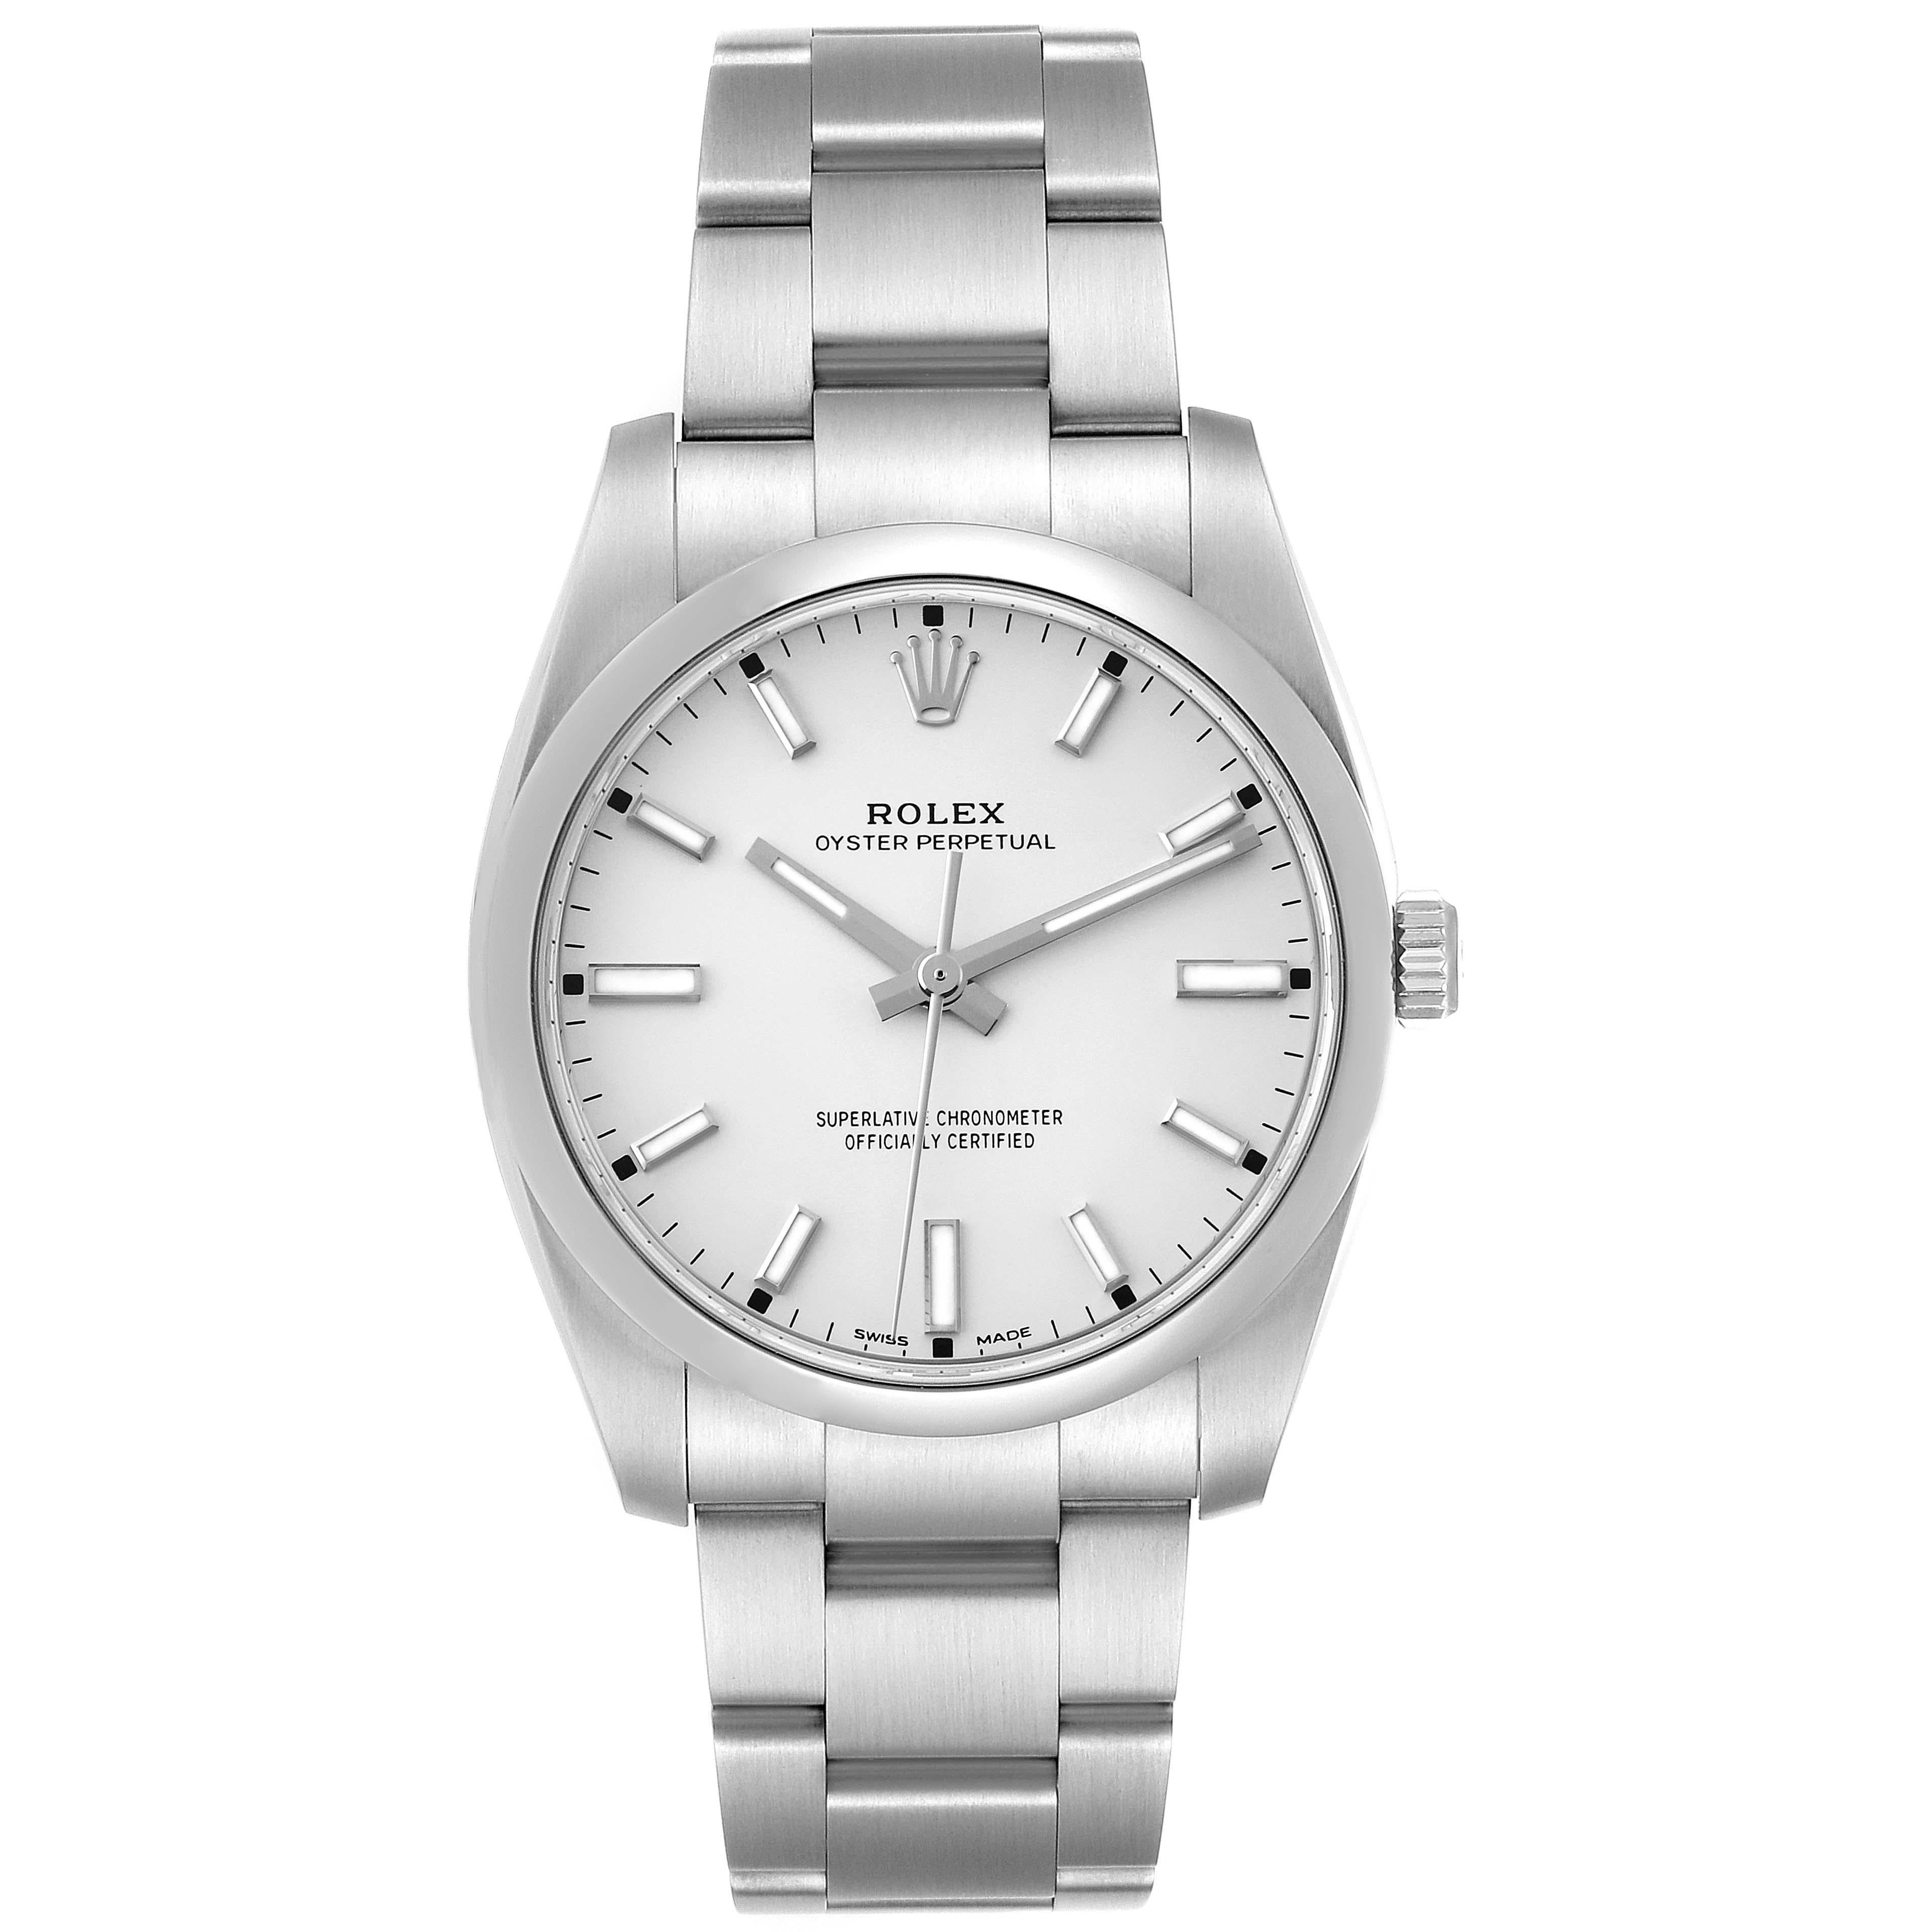 Rolex Oyster Perpetual Silver Dial Smooth Bezel Mens Watch 114200 Box Card. Officially certified chronometer self-winding movement. Stainless steel case 34 mm in diameter. Rolex logo on a crown. Stainless steel smooth domed bezel. Scratch resistant